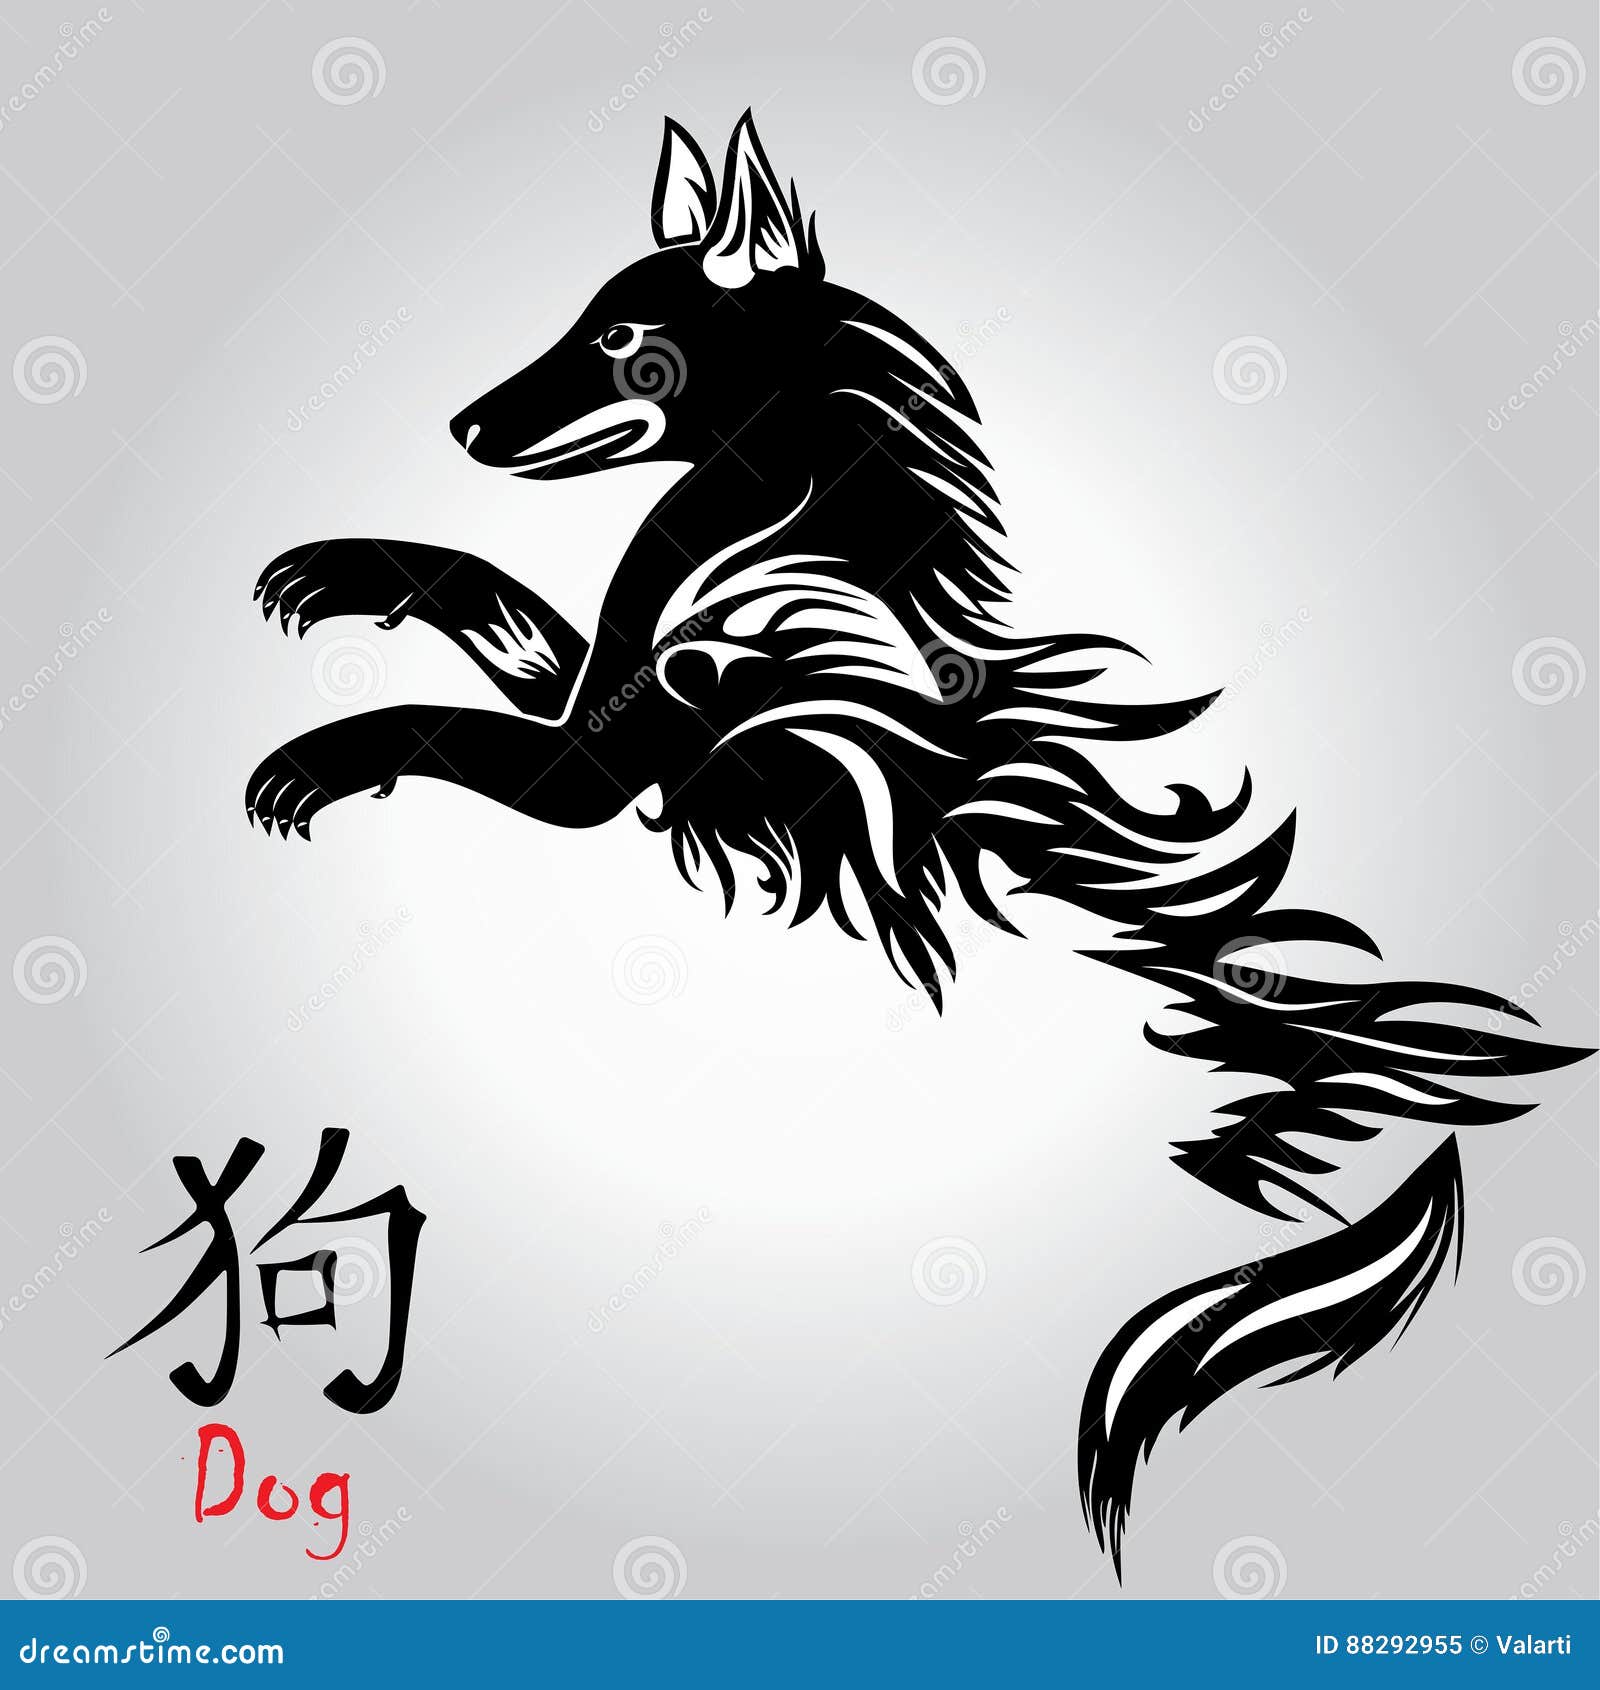 Puppy Animal Tattoo of Chinese New Year of the Dog Vector File Organized in  Layers for Easy Editing. Stock Vector - Illustration of december, logo:  88292955